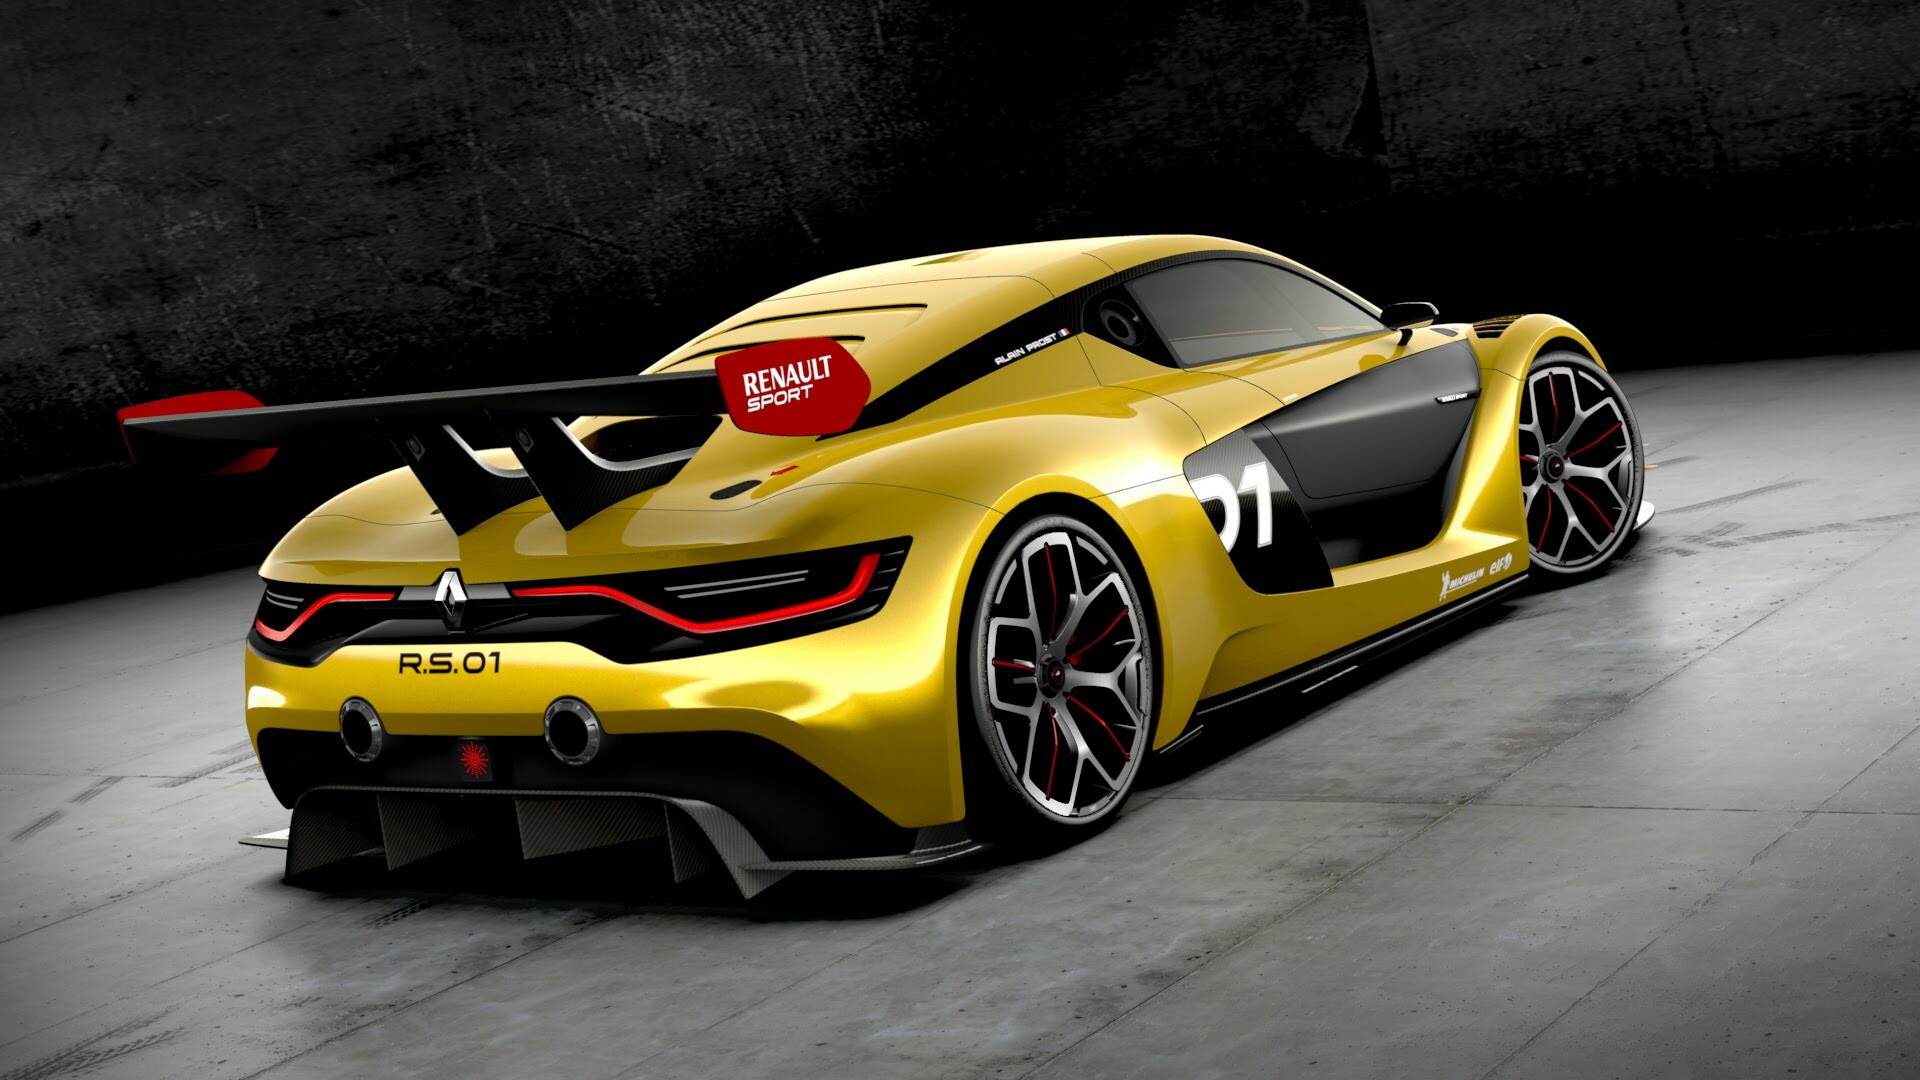 Renault: R.S.01, A sports racing car manufactured by the performance division of a French automaker. 1920x1080 Full HD Background.